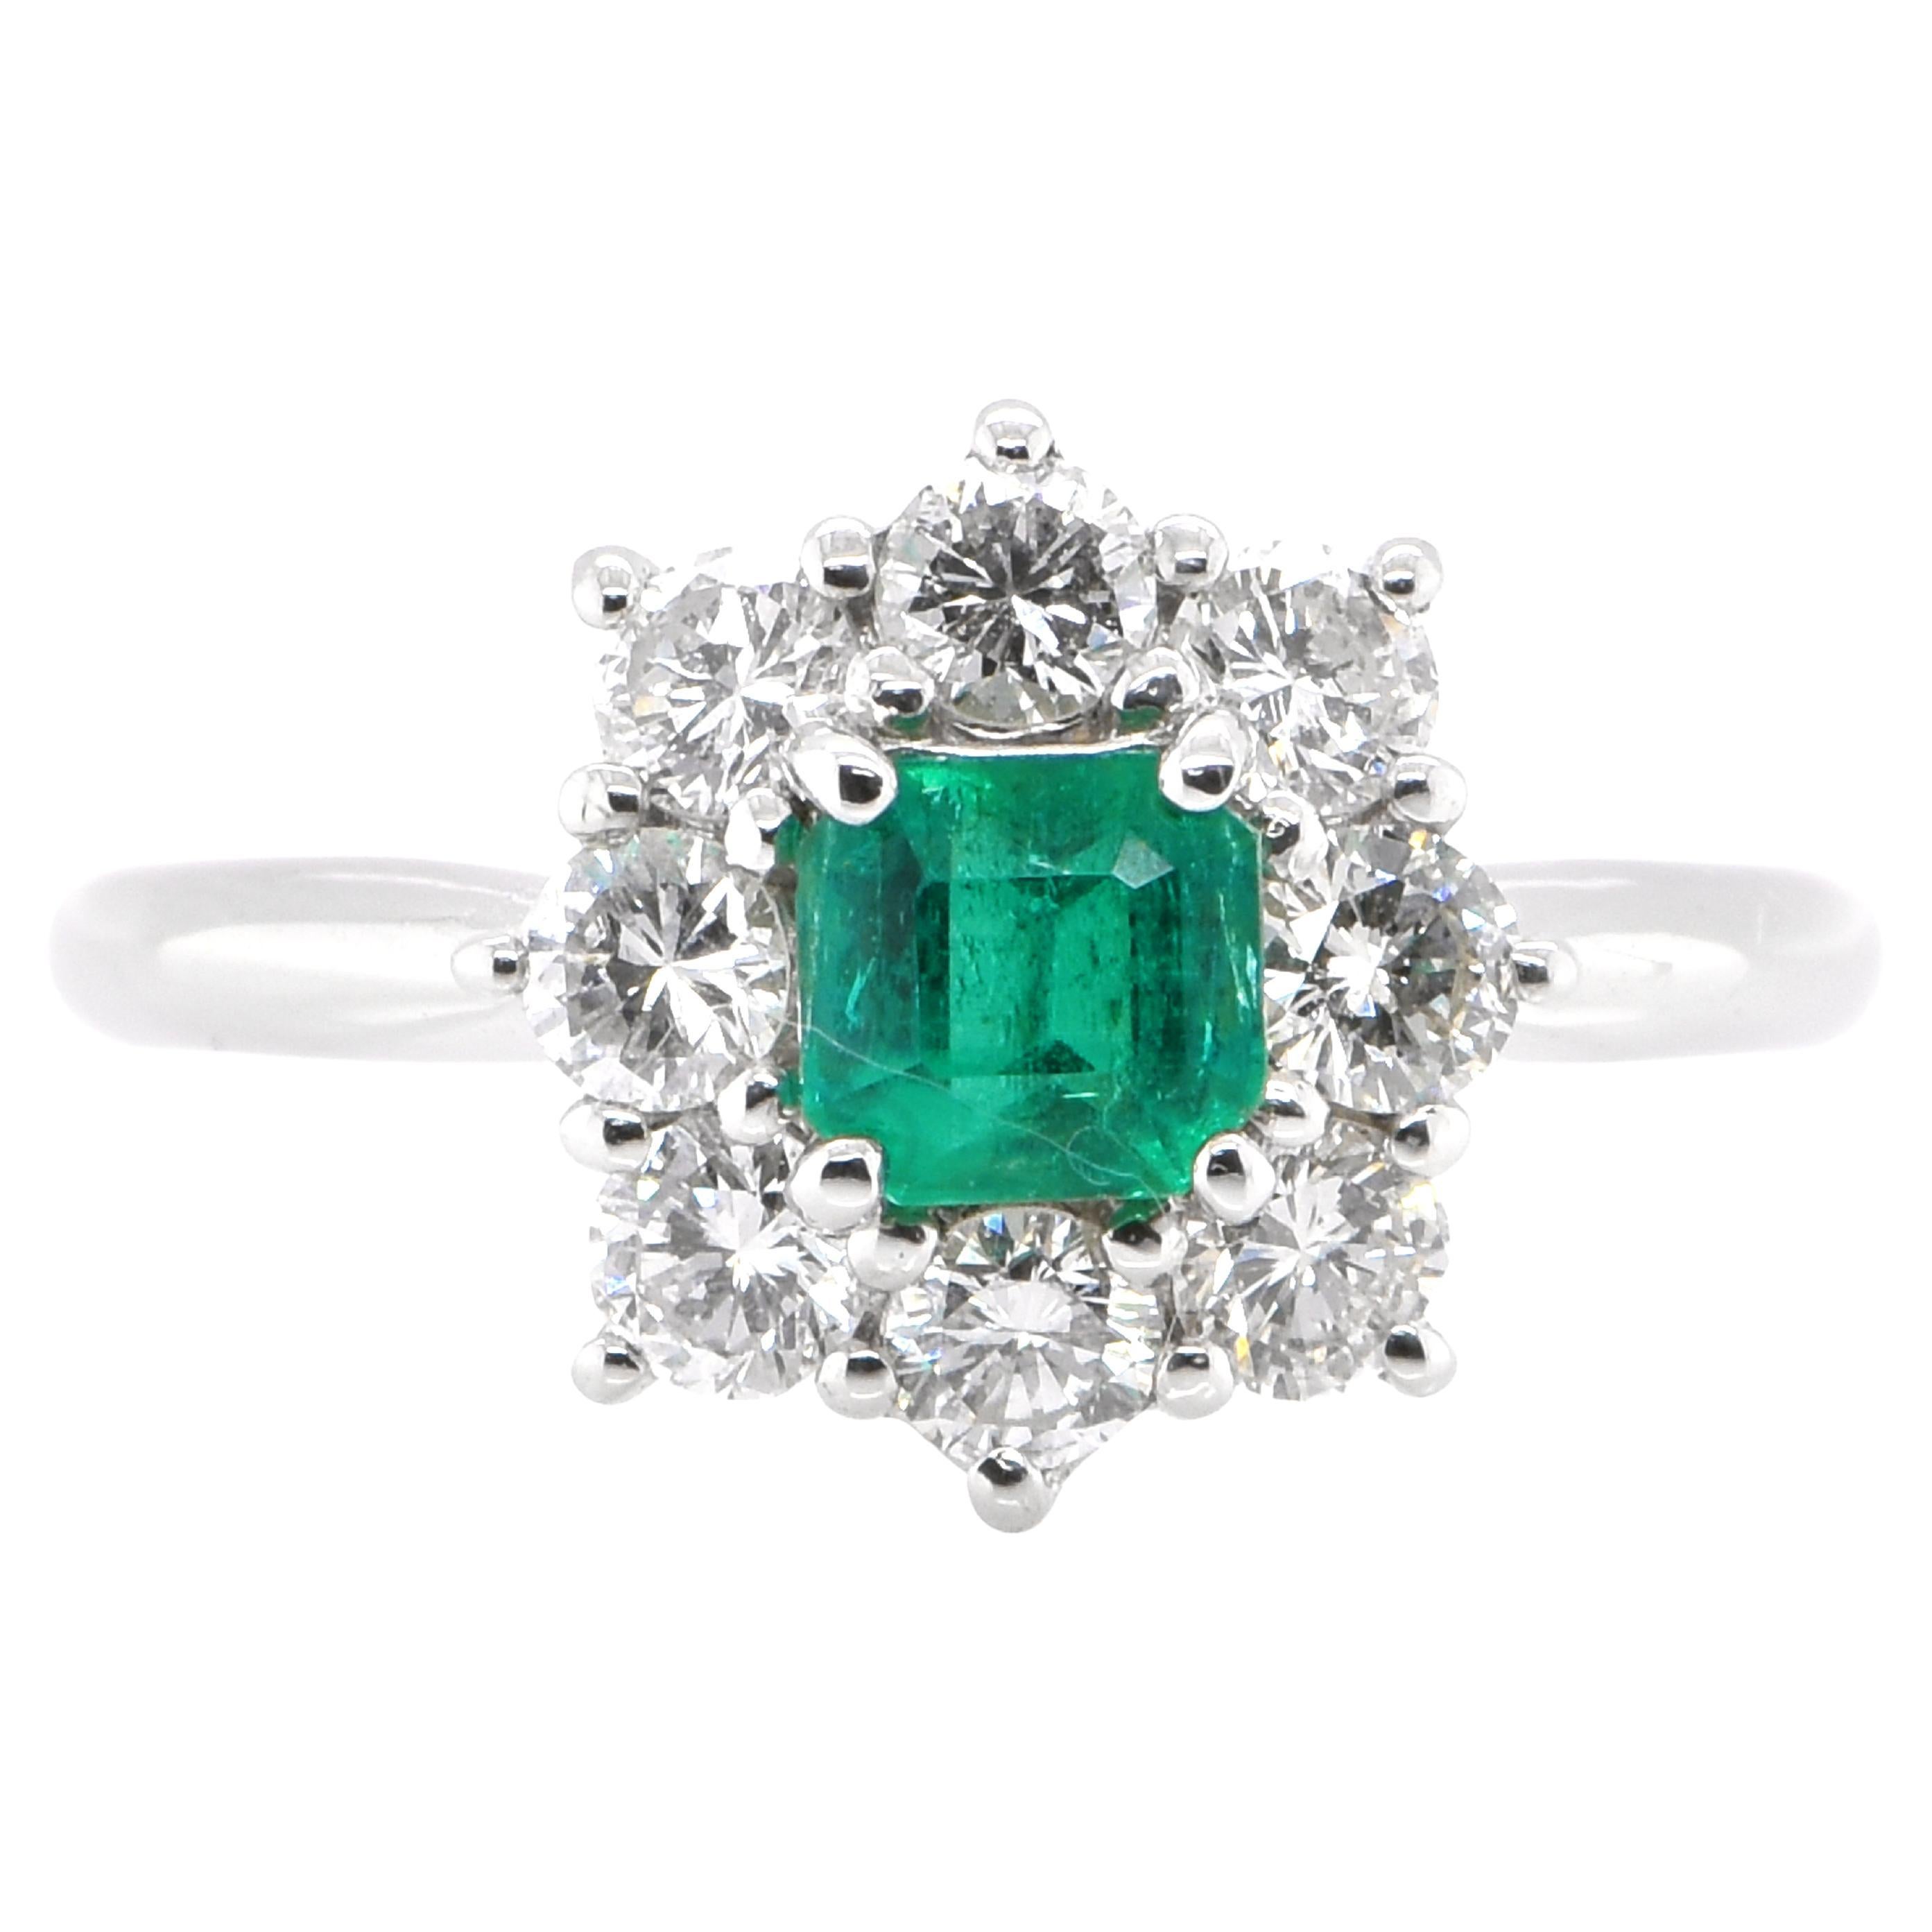 0.48 Carat Natural Colombian Emerald and Diamond Ring Set in Platinum